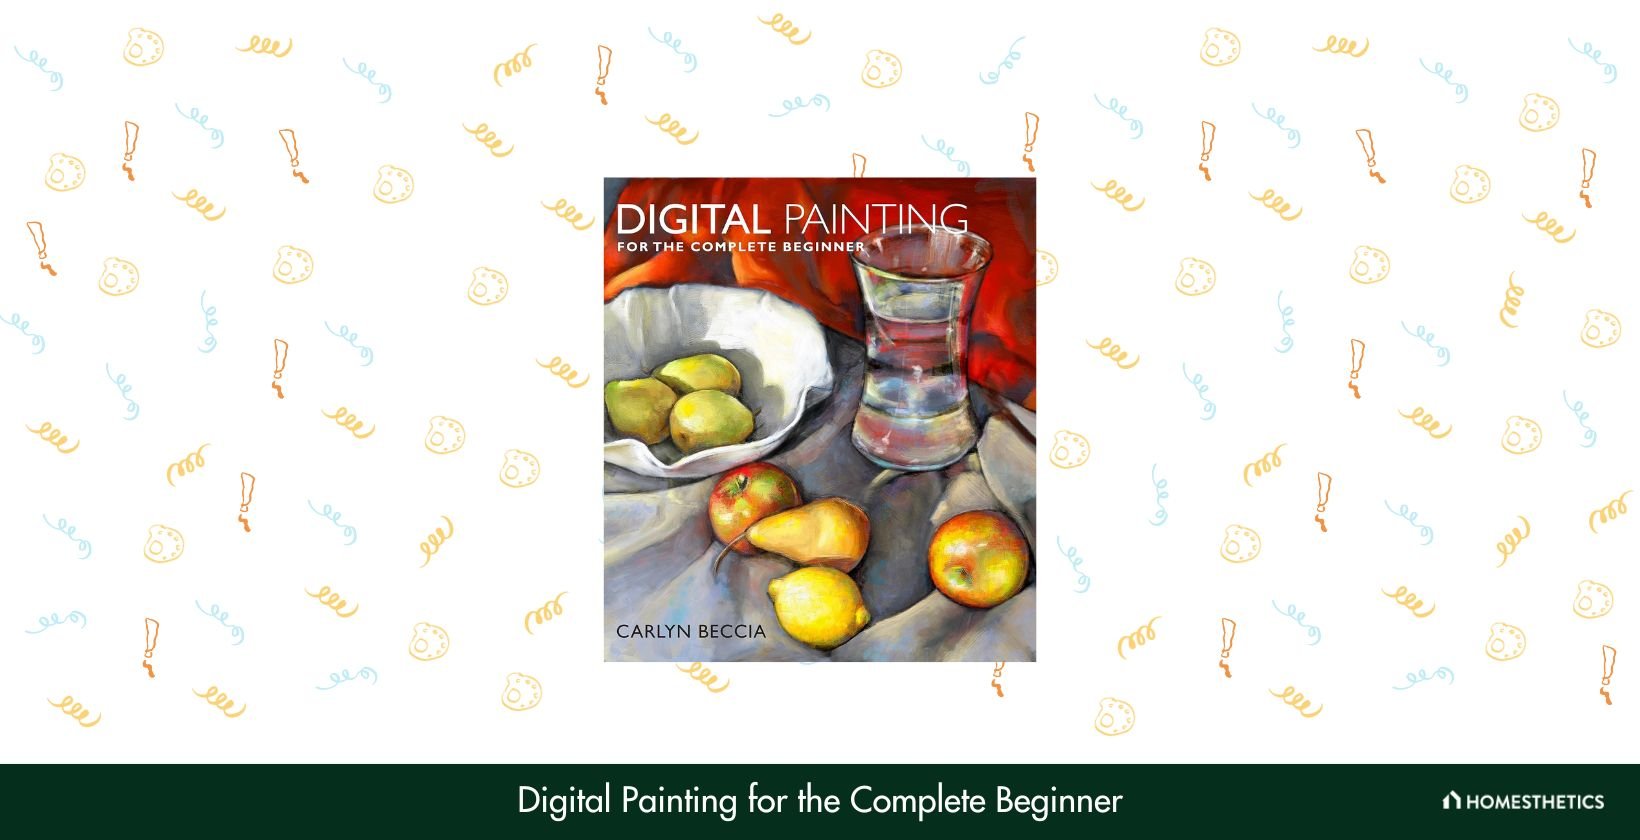 Digital Painting for the Complete Beginner